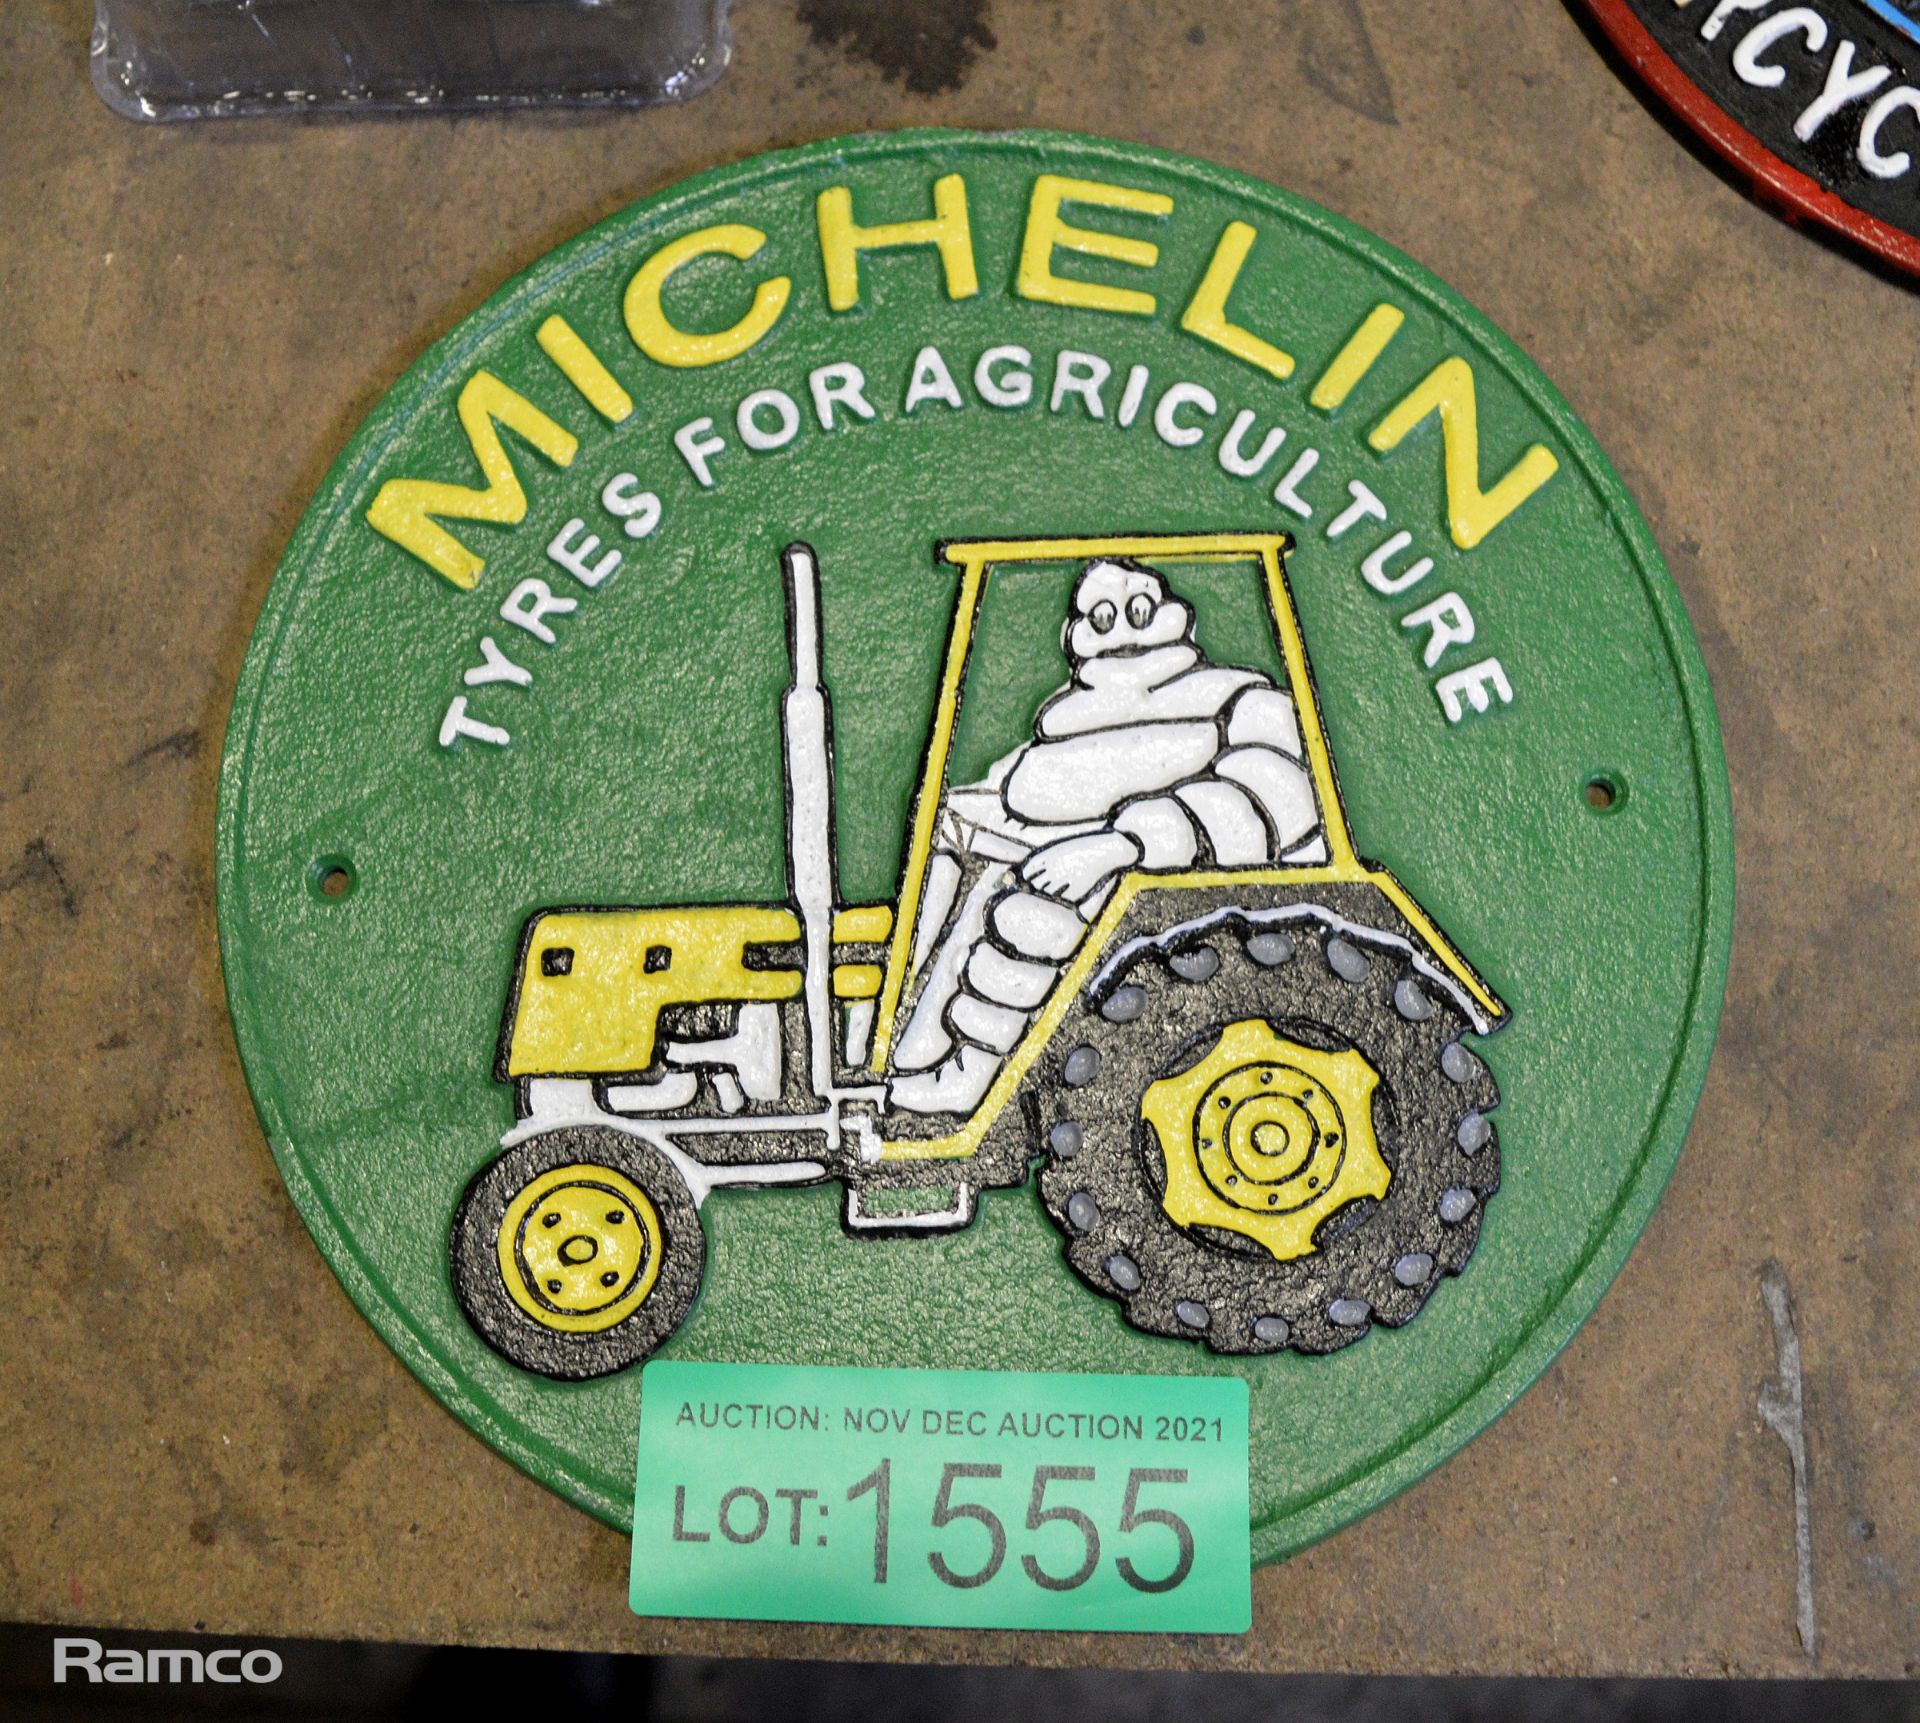 Michelin agriculture cast sign